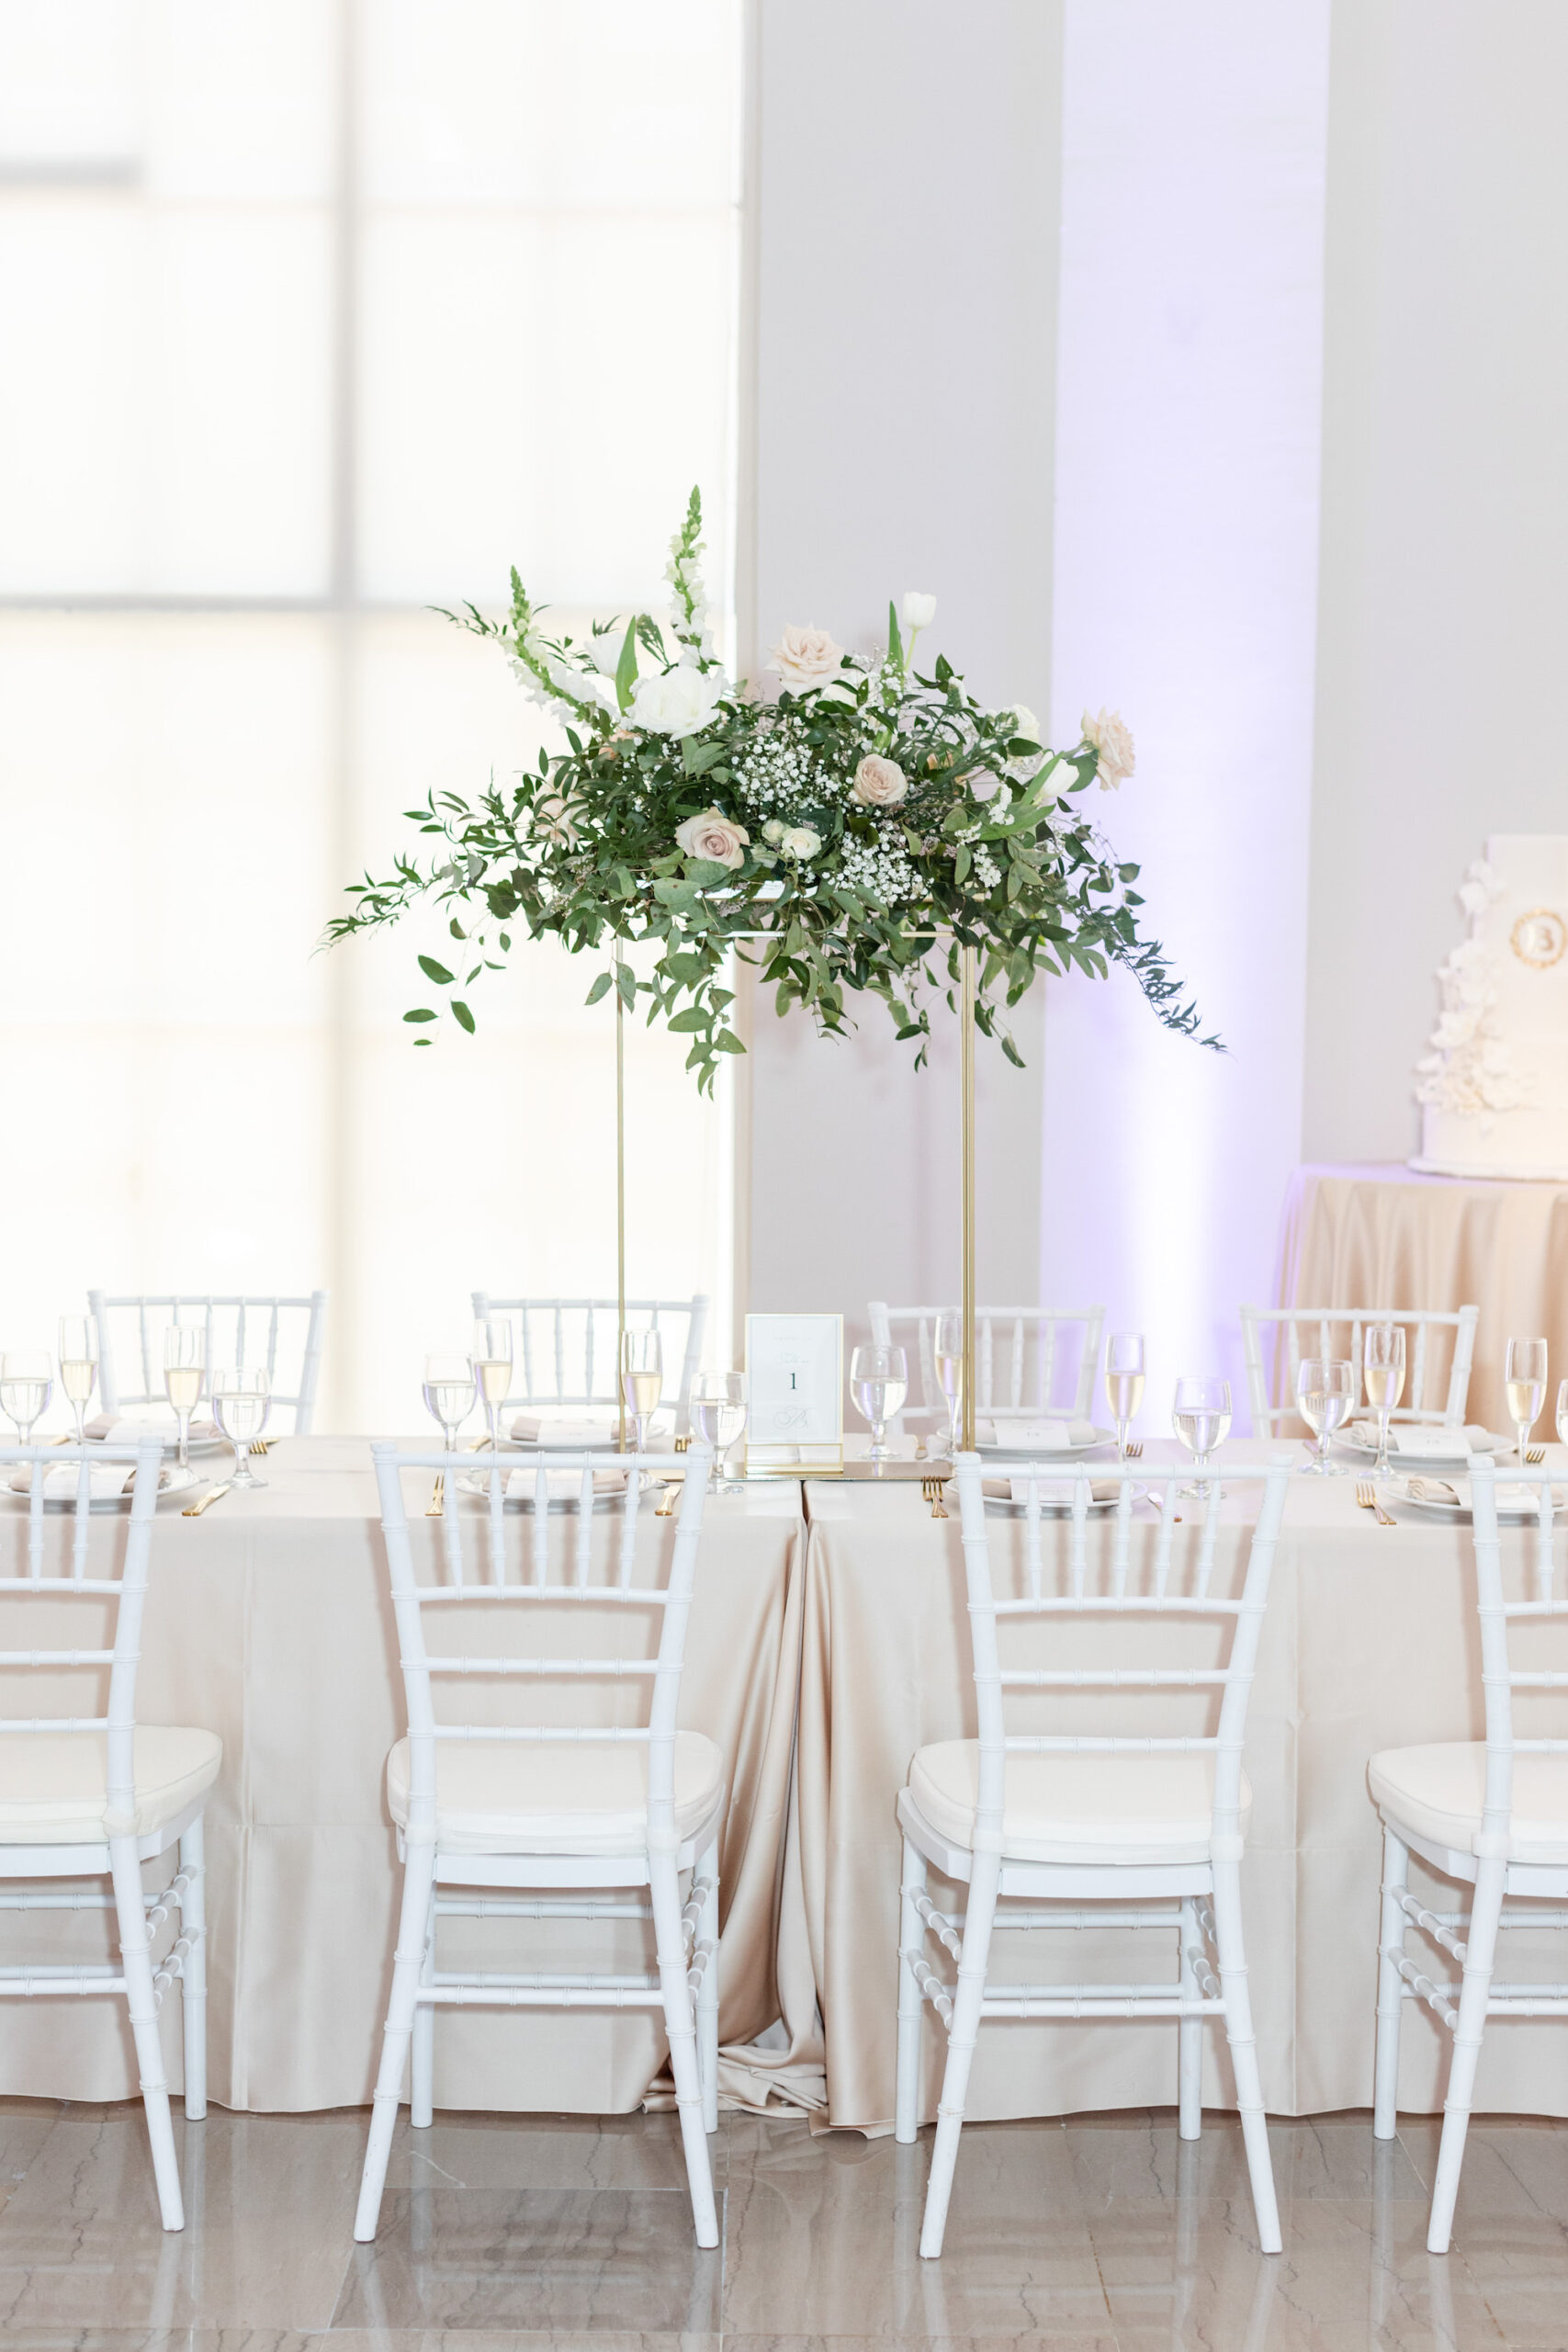 Modern Romantic Wedding Reception Decor, Champagne Table Linen, White Chiavari Chairs, Tall Gold Stands with Greenery with White and Blush Pink Floral Centerpiece